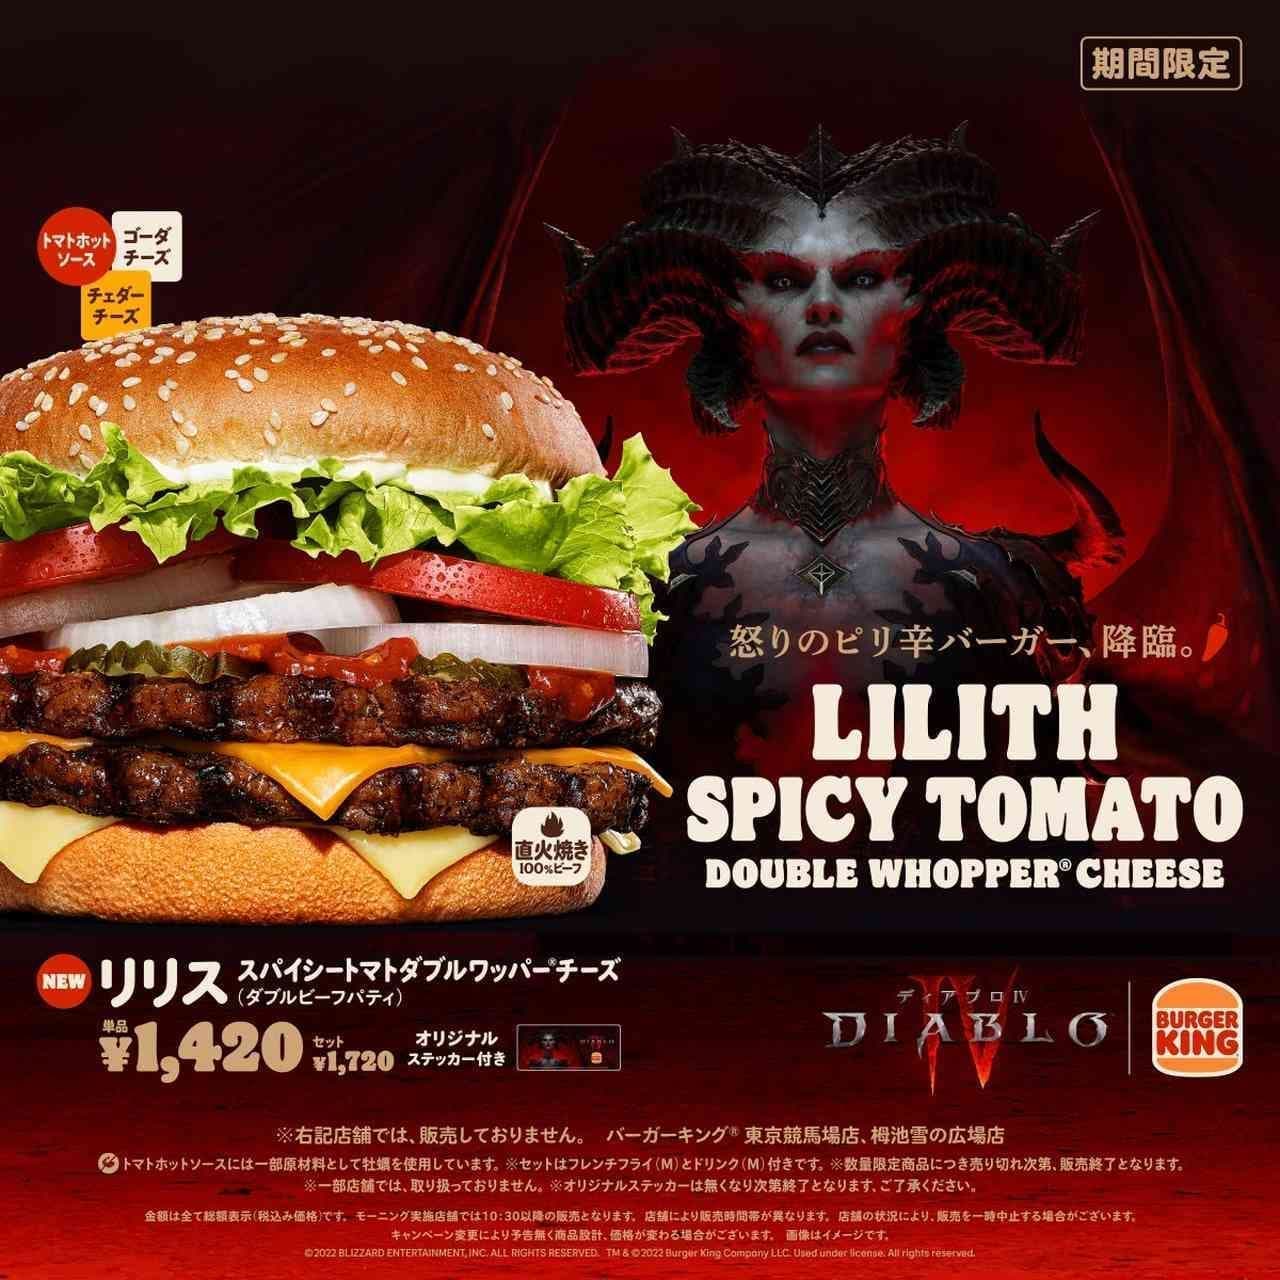 Burger King "Lilith Spicy Tomato Double Whopper Cheese"